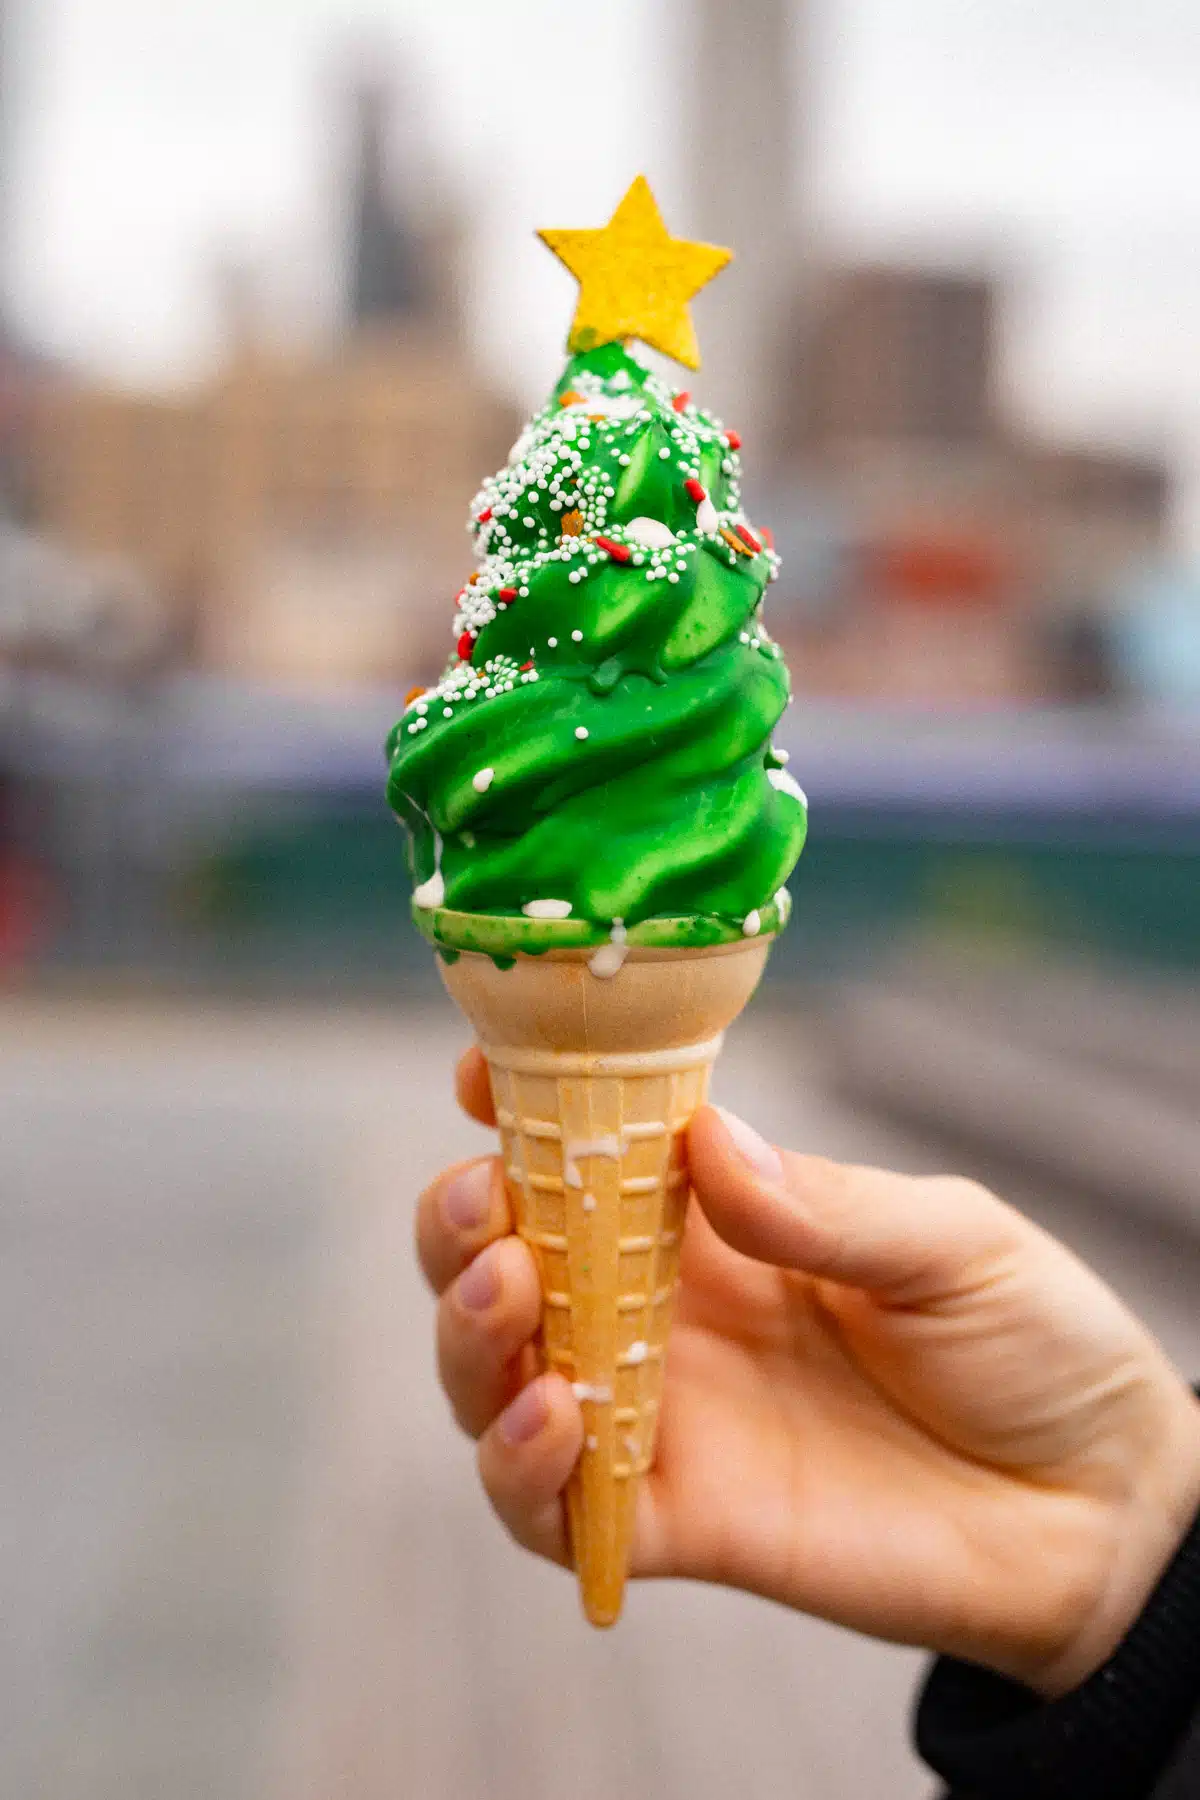 The Grinch Mister Dips December in NYC
christmas desserts NYC